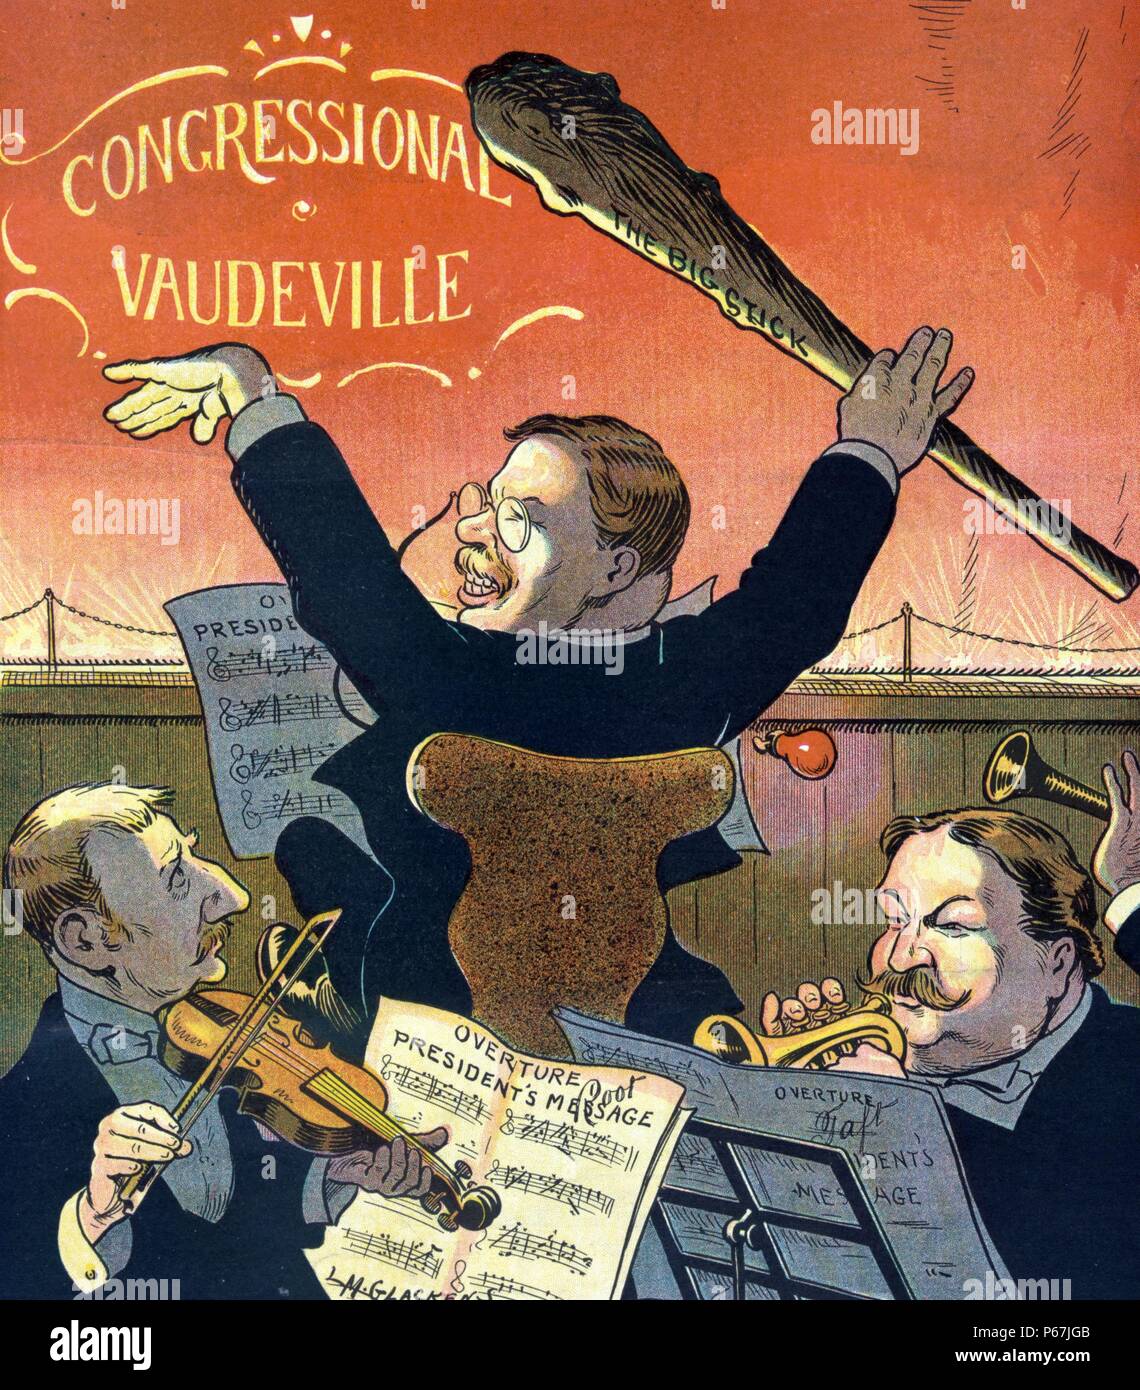 Let 'er go, Professor!' President Theodore Roosevelt at the 'Congressional Vaudeville' conducting an orchestra with a large stick labelled 'The Big Stick', with two band members, Elihu Root and William H. Taft performing 'Overture President's Message'. Stock Photo